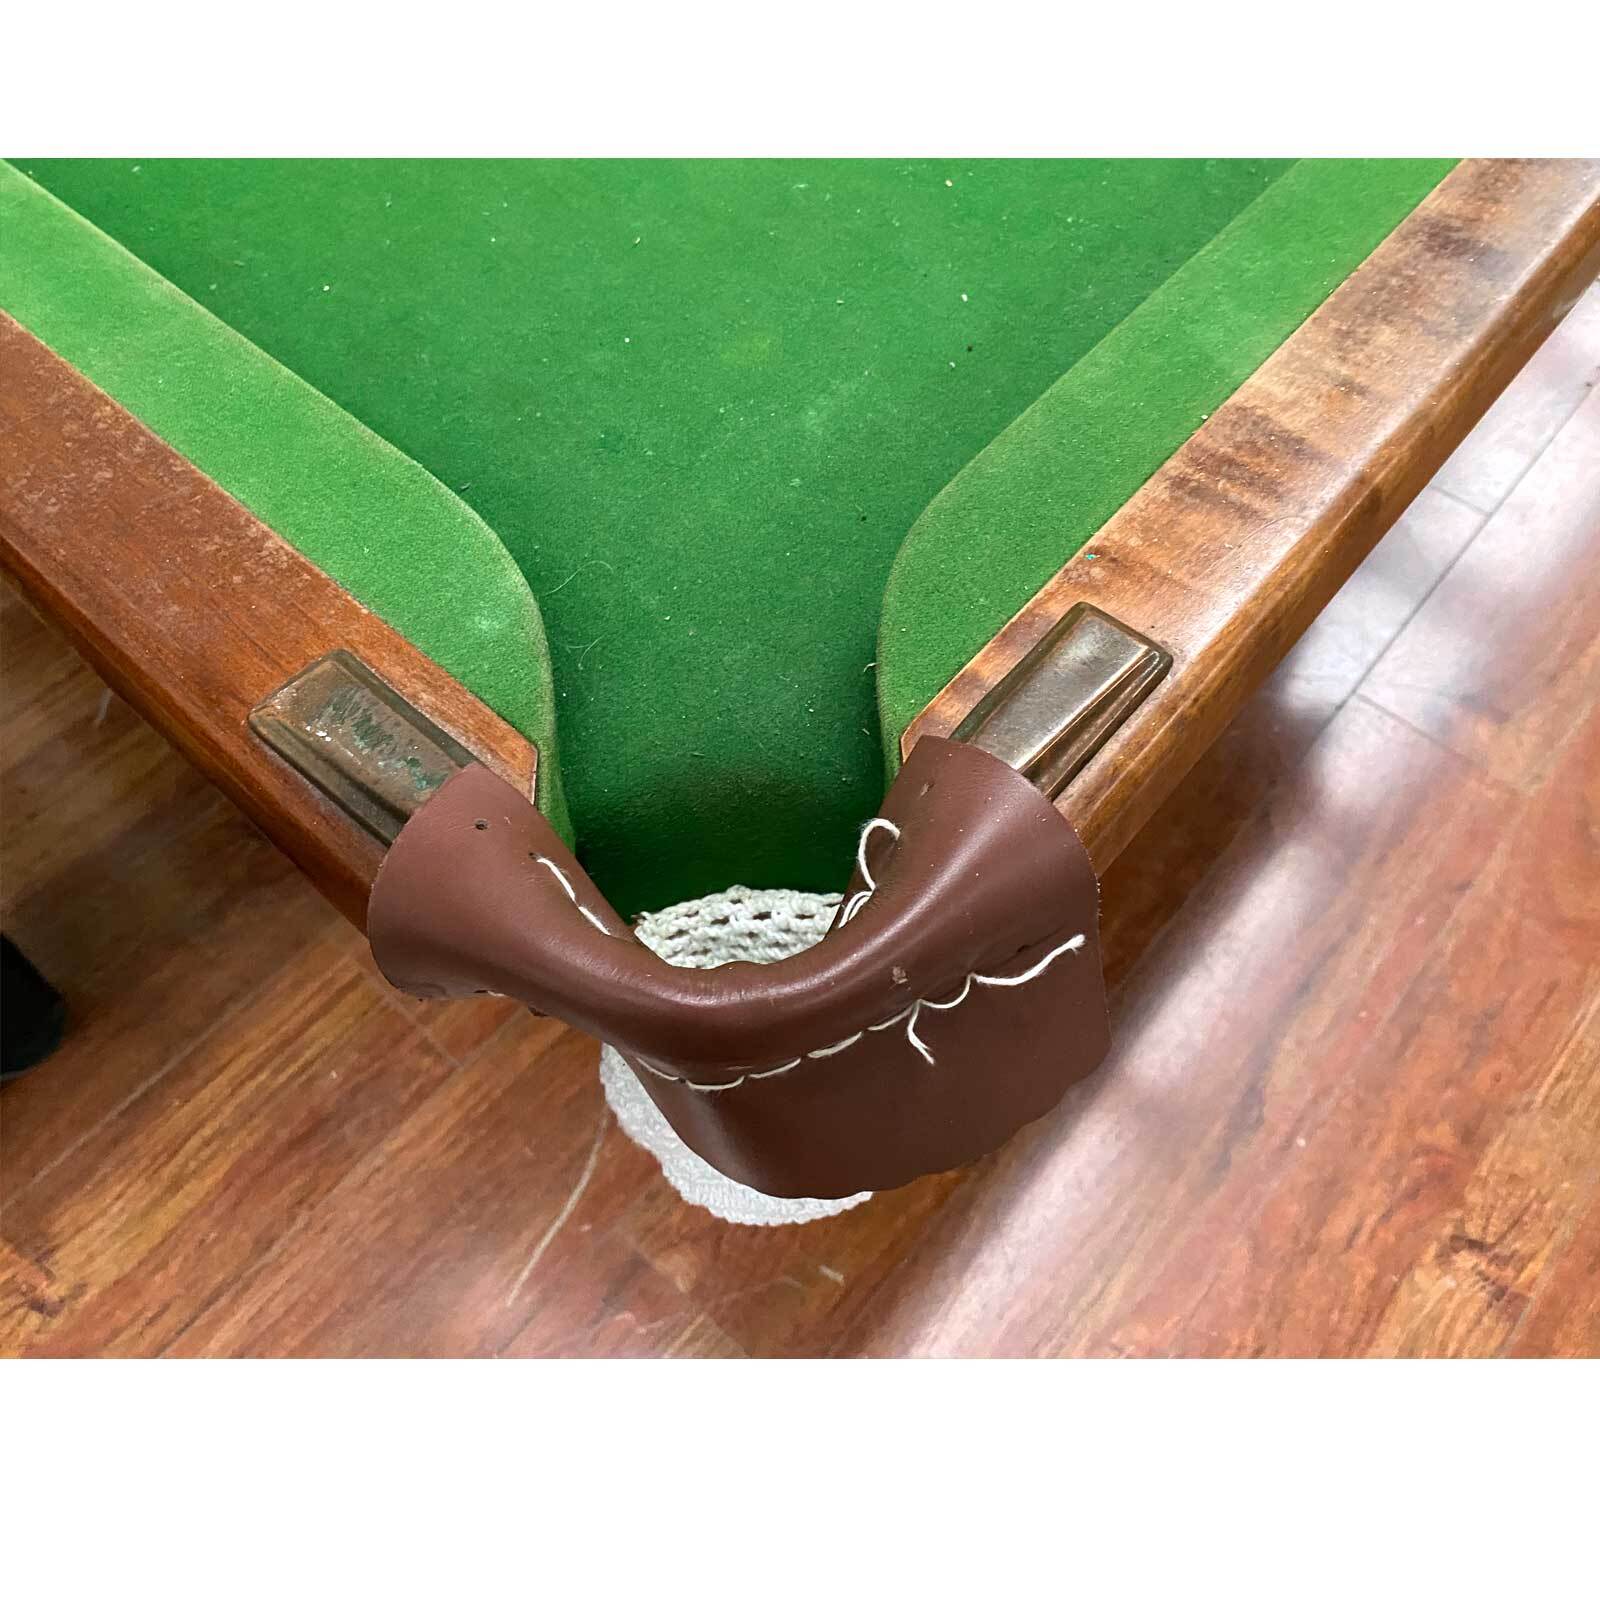 Melbourne Special - 9ft second hand pool table, sale as it is